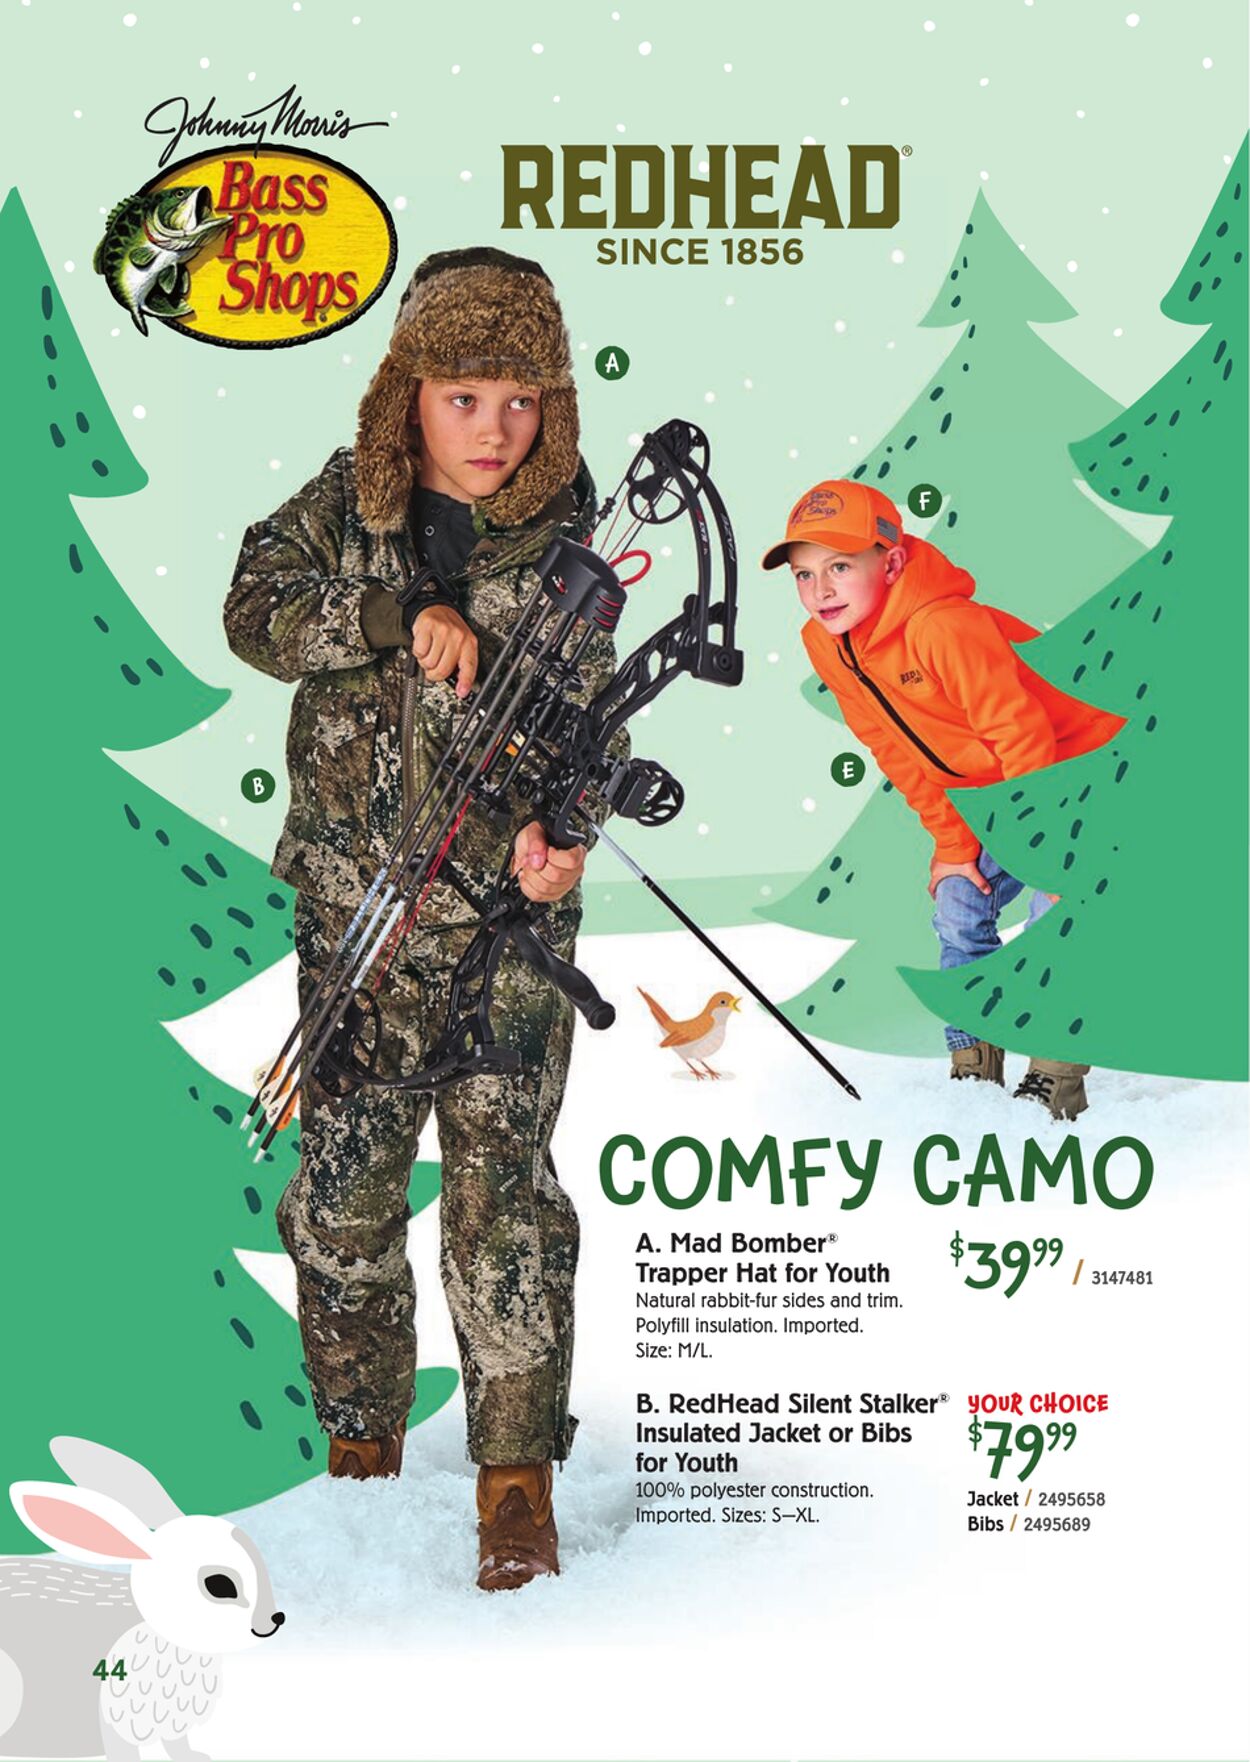 Weekly ad Cabela's 11/01/2023 - 03/31/2024